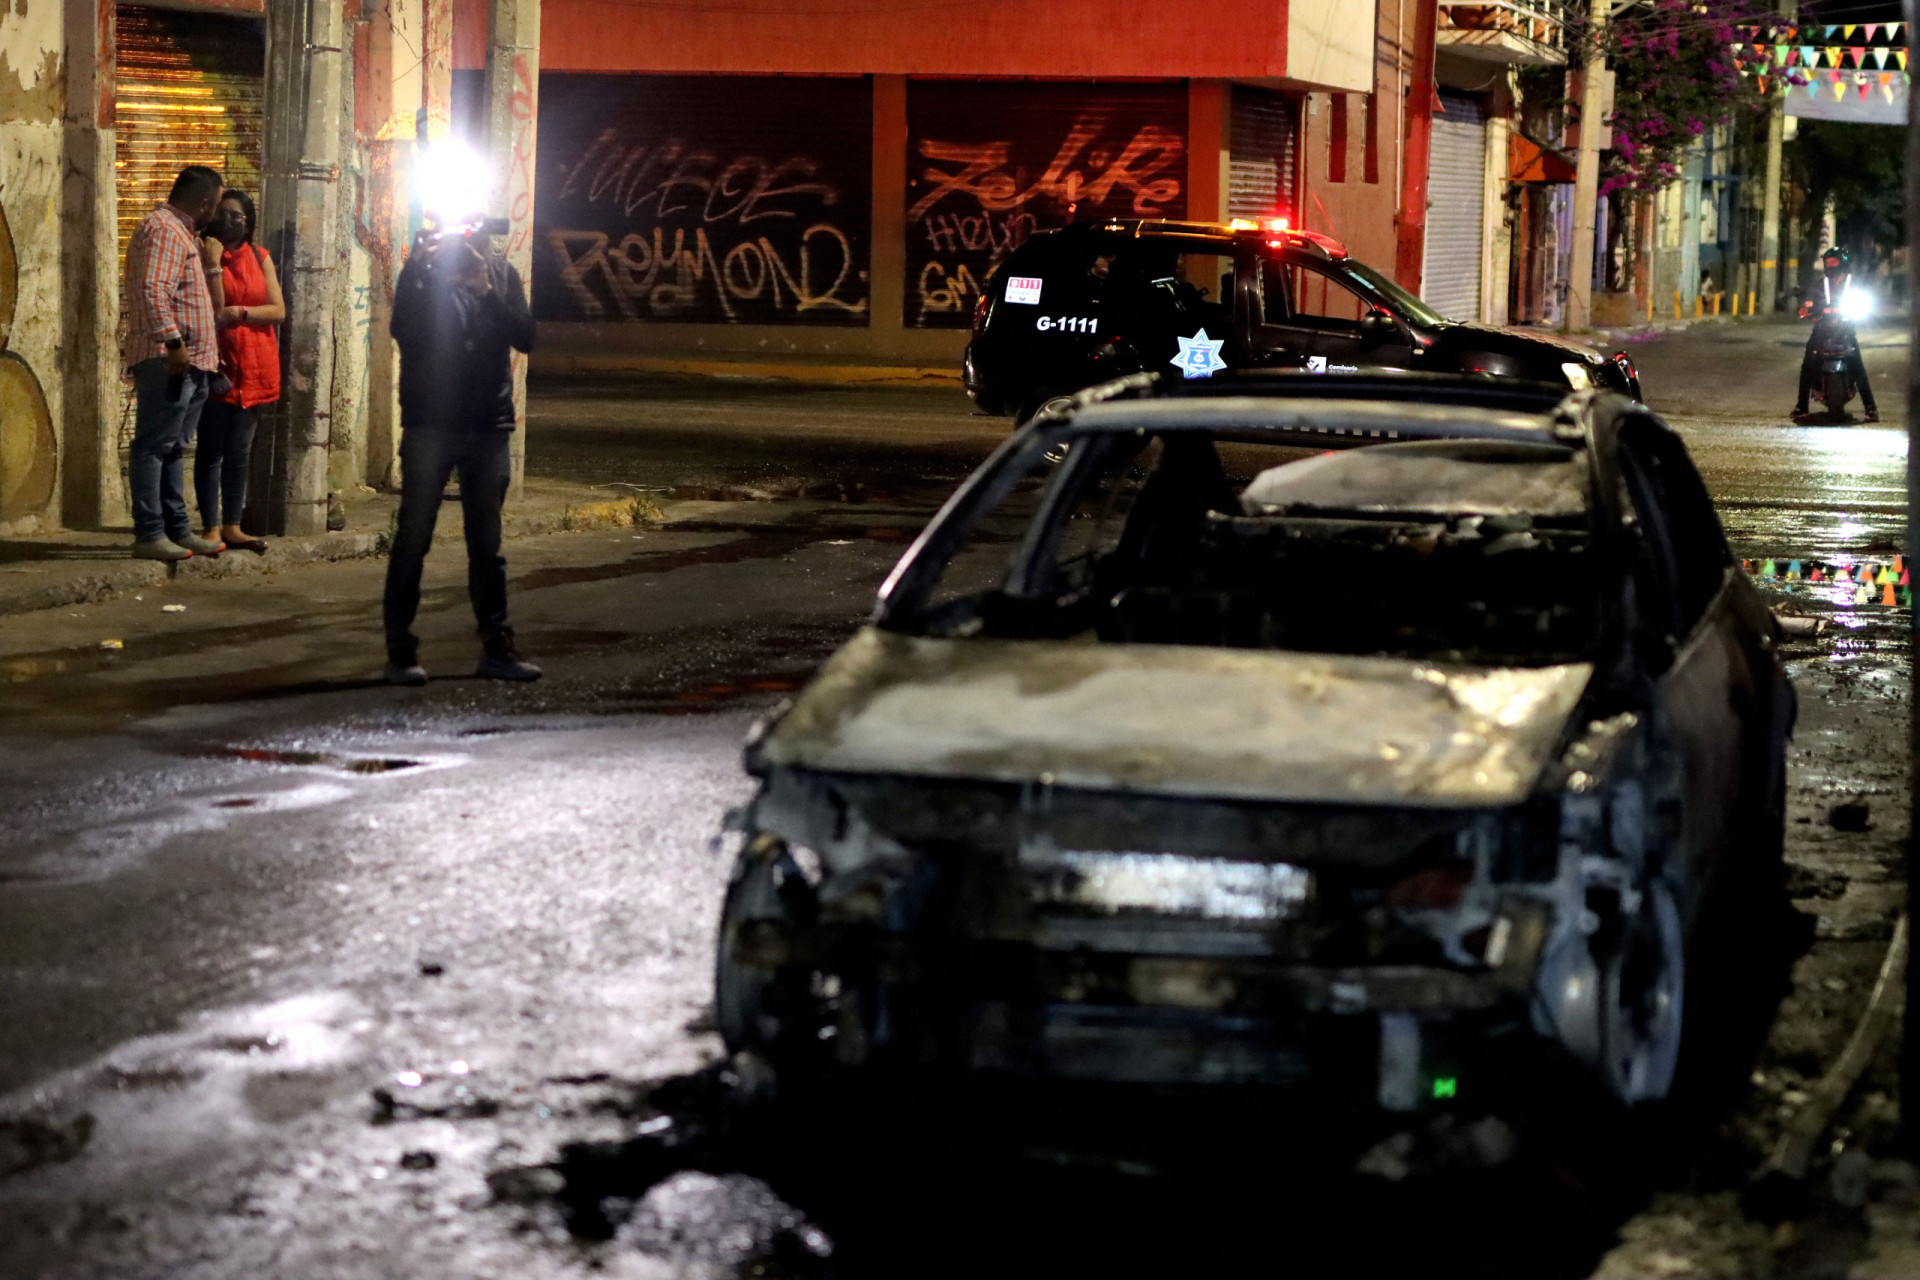 <p>With 138 homicides for every 100,000 inhabitants, Ciudad Obregón is no stranger to violence. This Mexican city tells tales of conflict and crime that keep locals on edge.</p><p>You may also like:<a href="https://www.starsinsider.com/n/503306?utm_source=msn.com&utm_medium=display&utm_campaign=referral_description&utm_content=578180en-en"> The Gurkhas: the feared and fearless soldiers of Nepal</a></p>